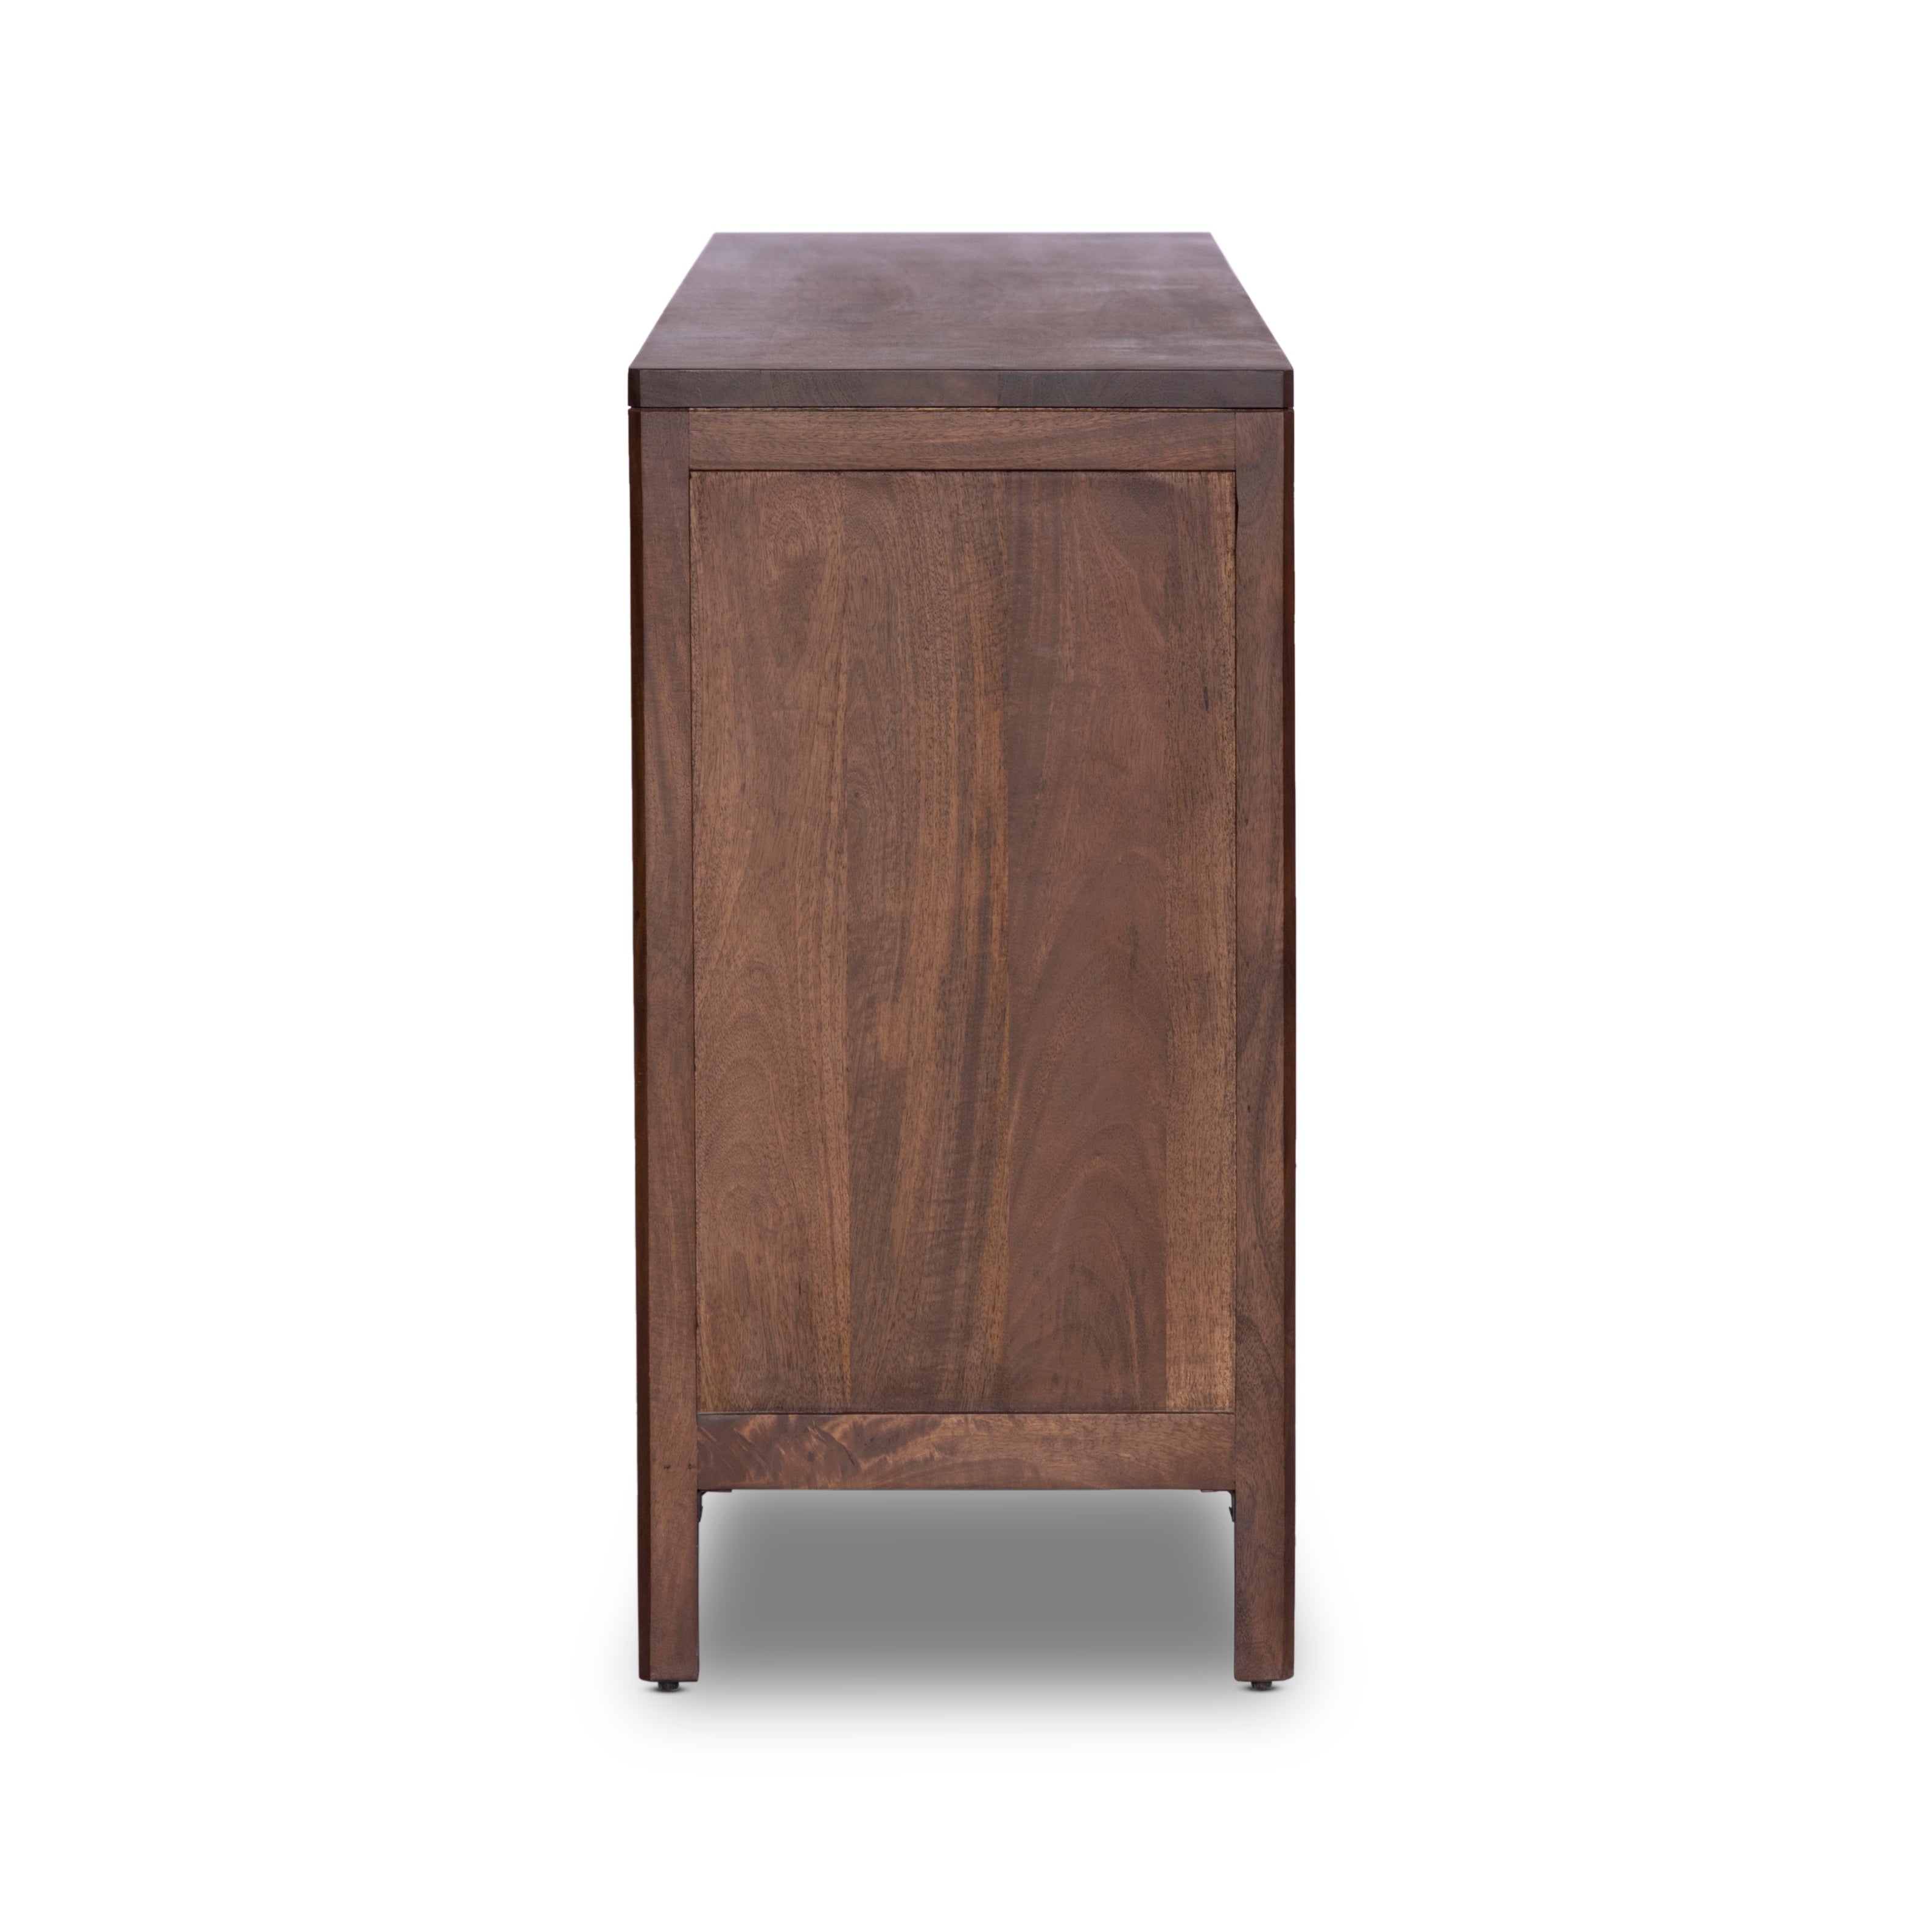 Brown-washed mango encases nine spacious drawers of woven cane, for a textural, monochromatic look. Amethyst Home provides interior design, new construction, custom furniture, and area rugs in the Salt Lake City metro area.